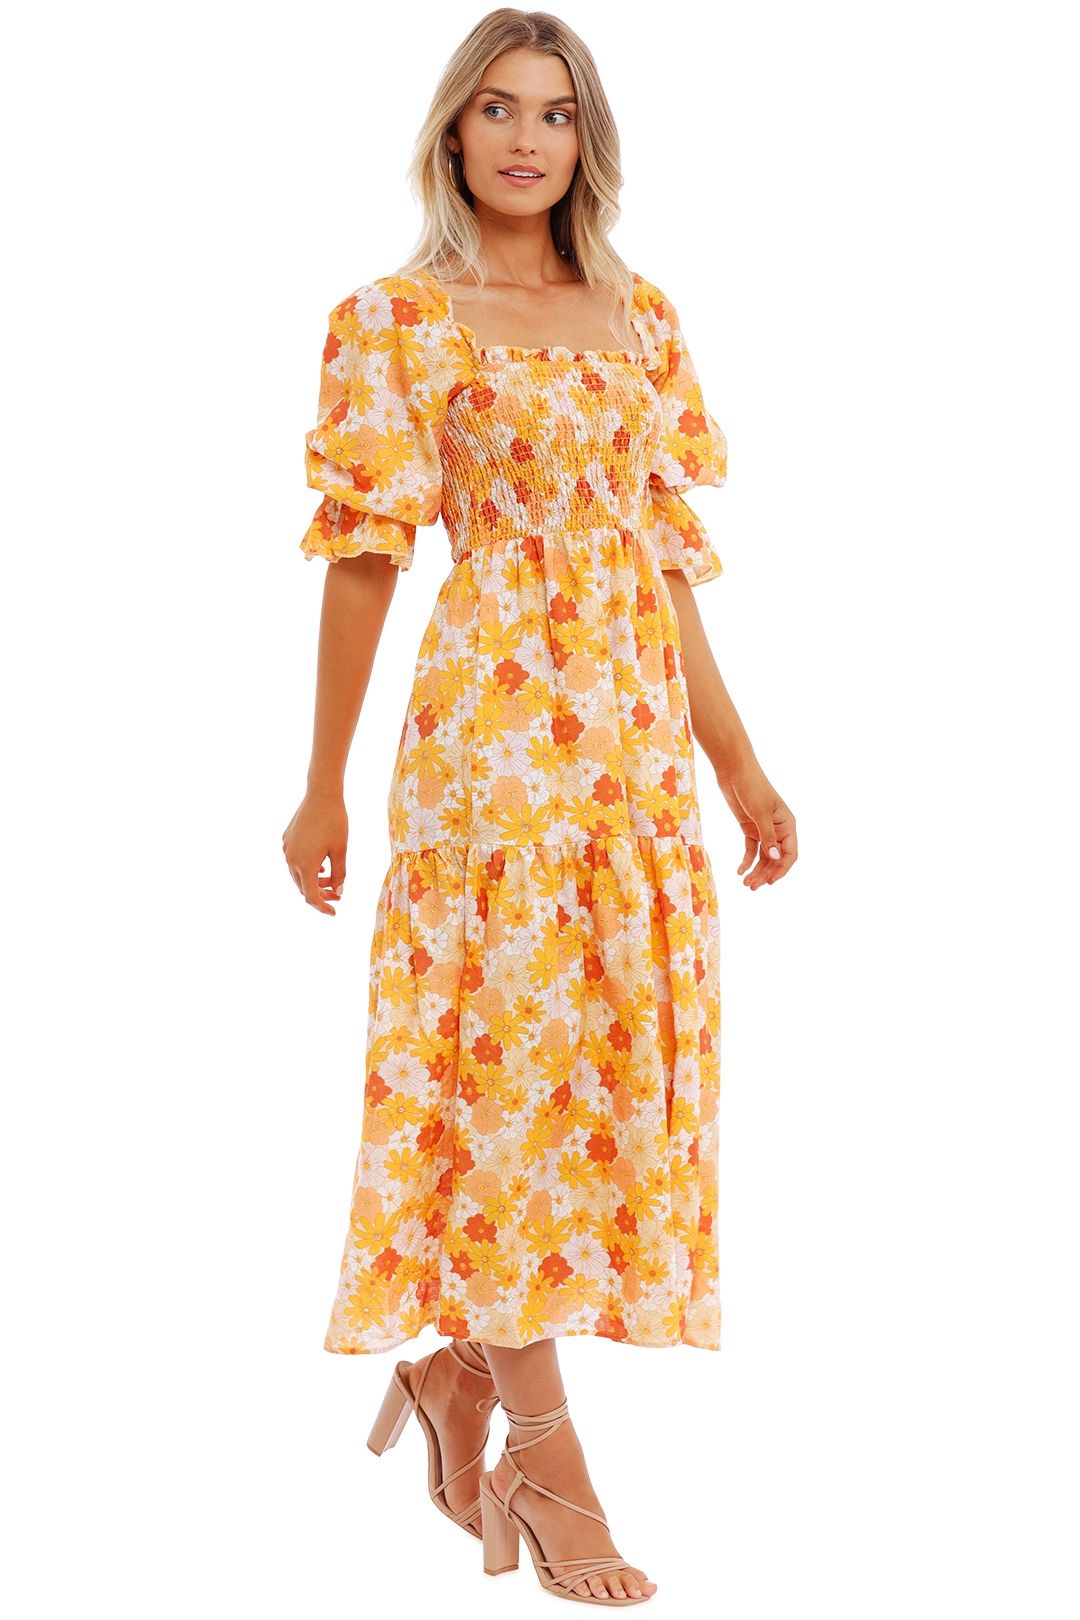 Charlie Holiday Amber Dress Seventies Floral print